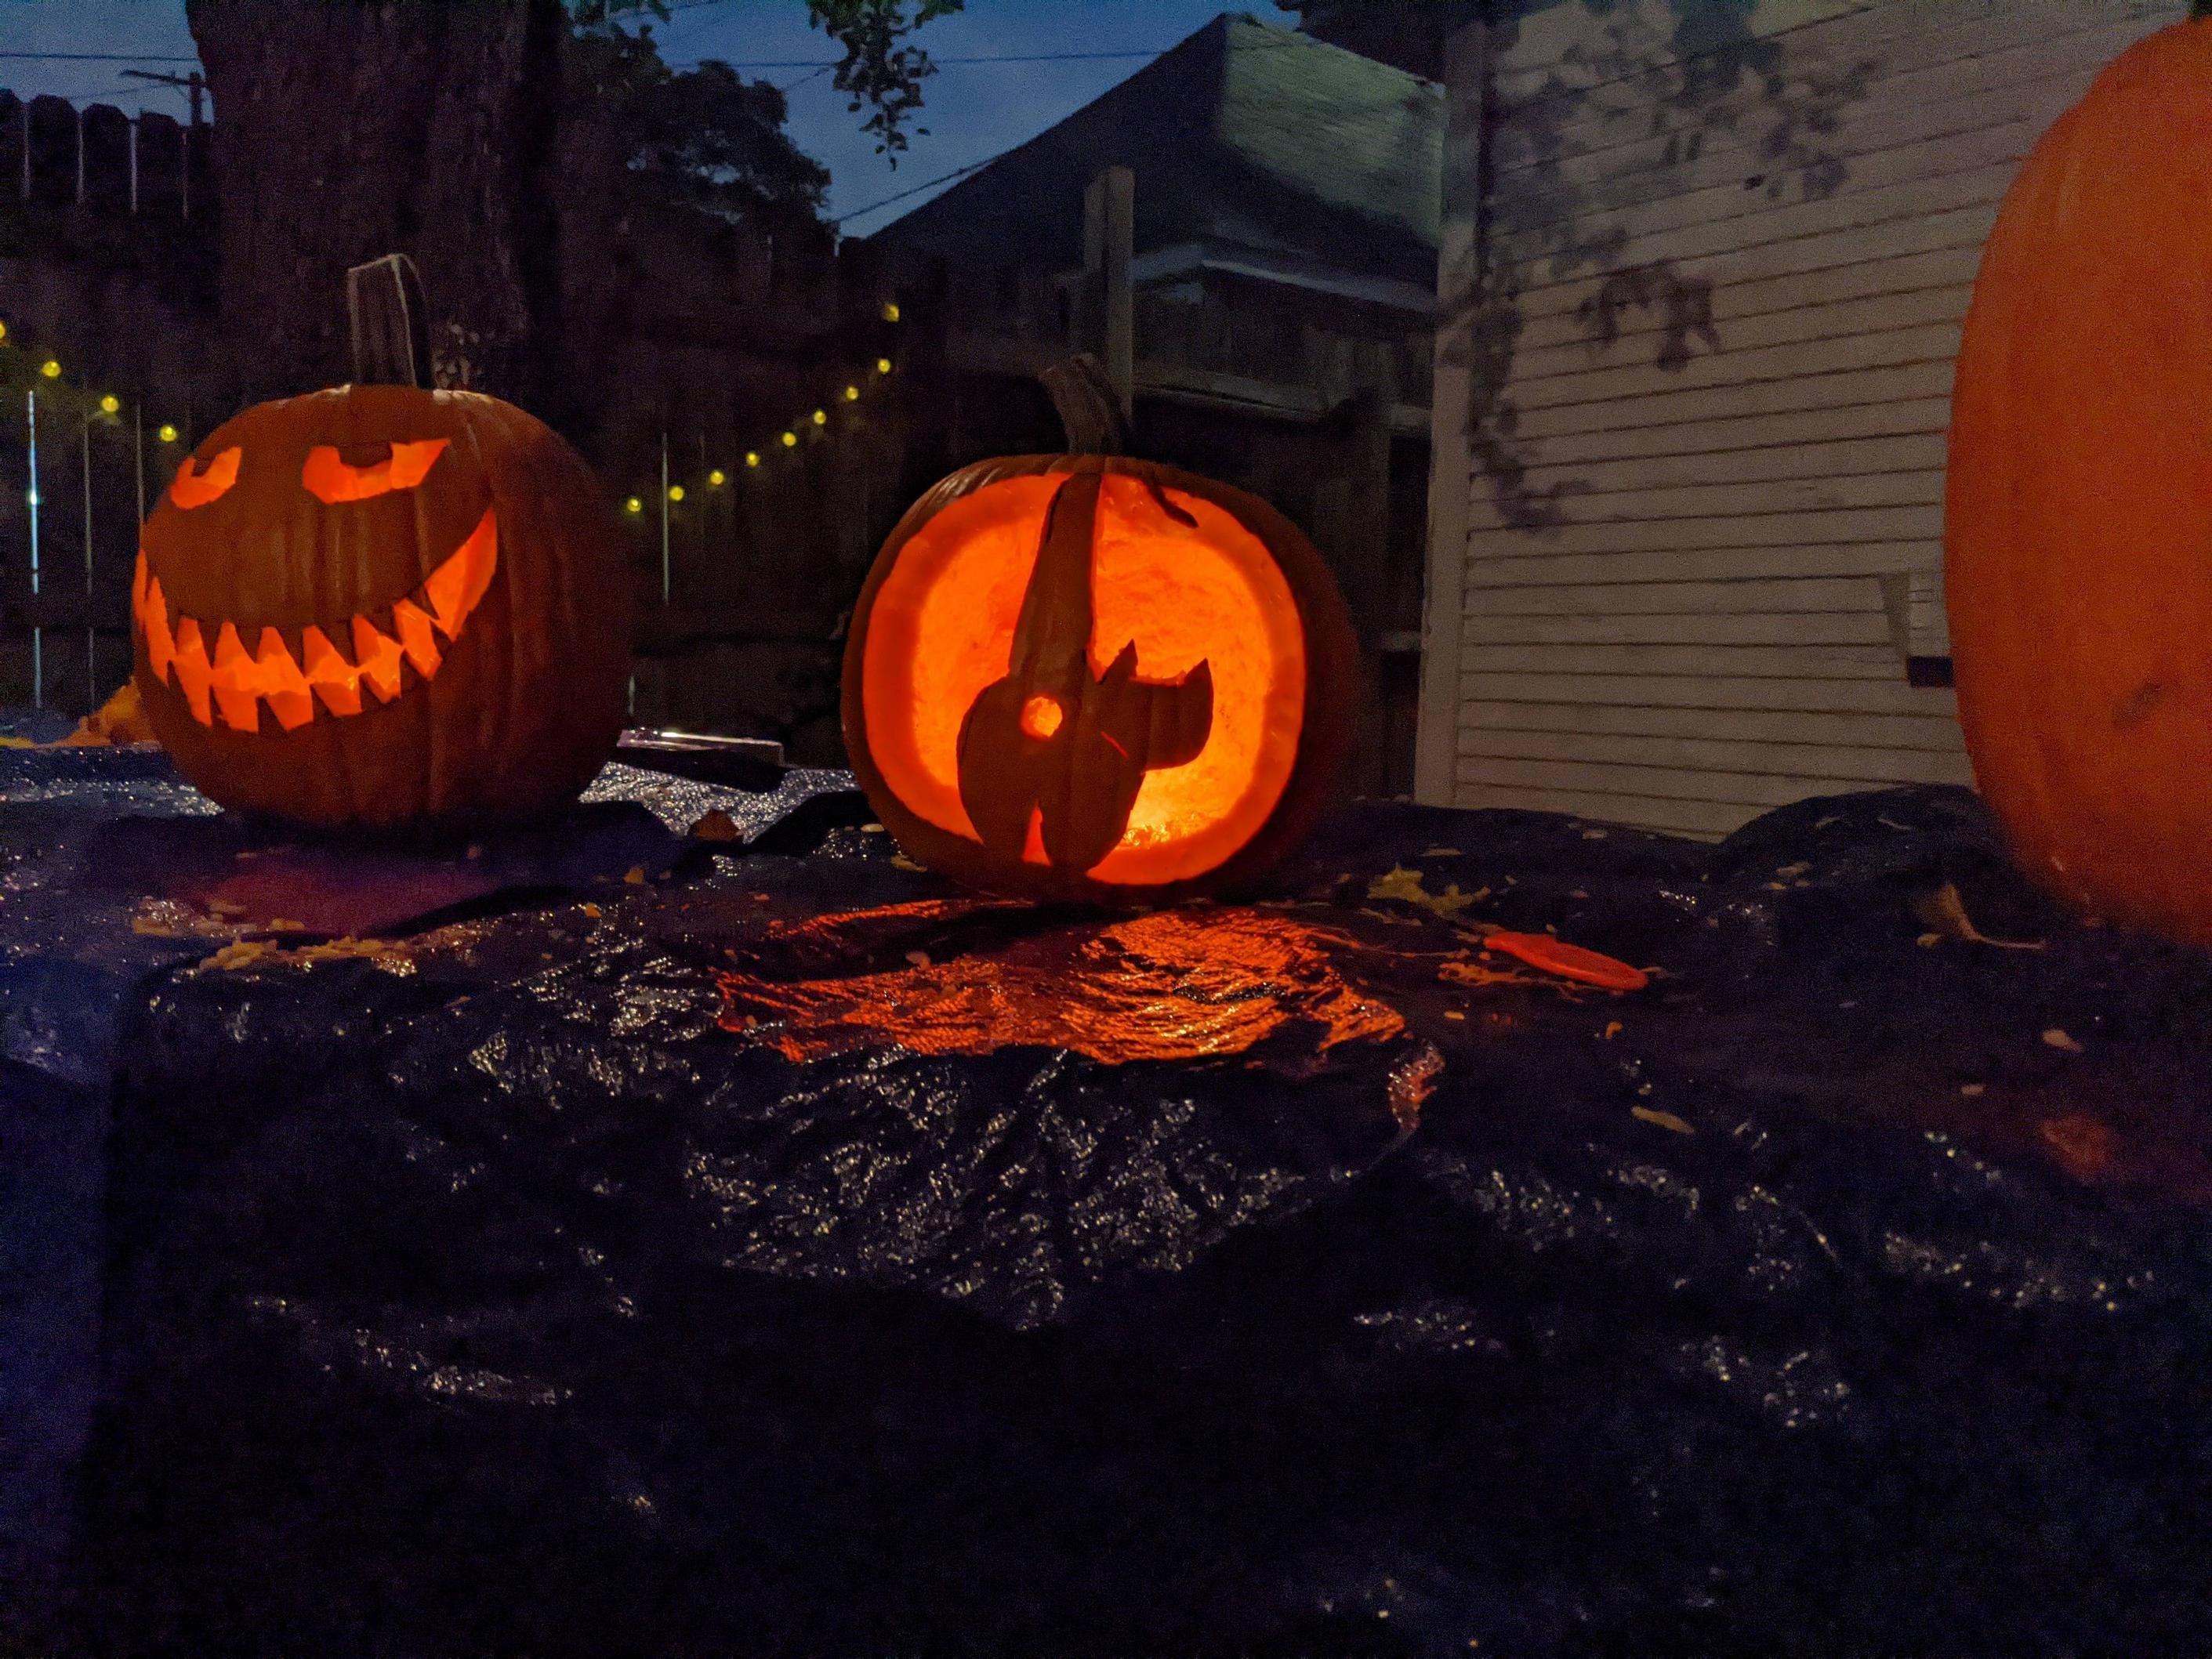 Haven't carved a pumpkin in years. This weekend I carved a cat butt.